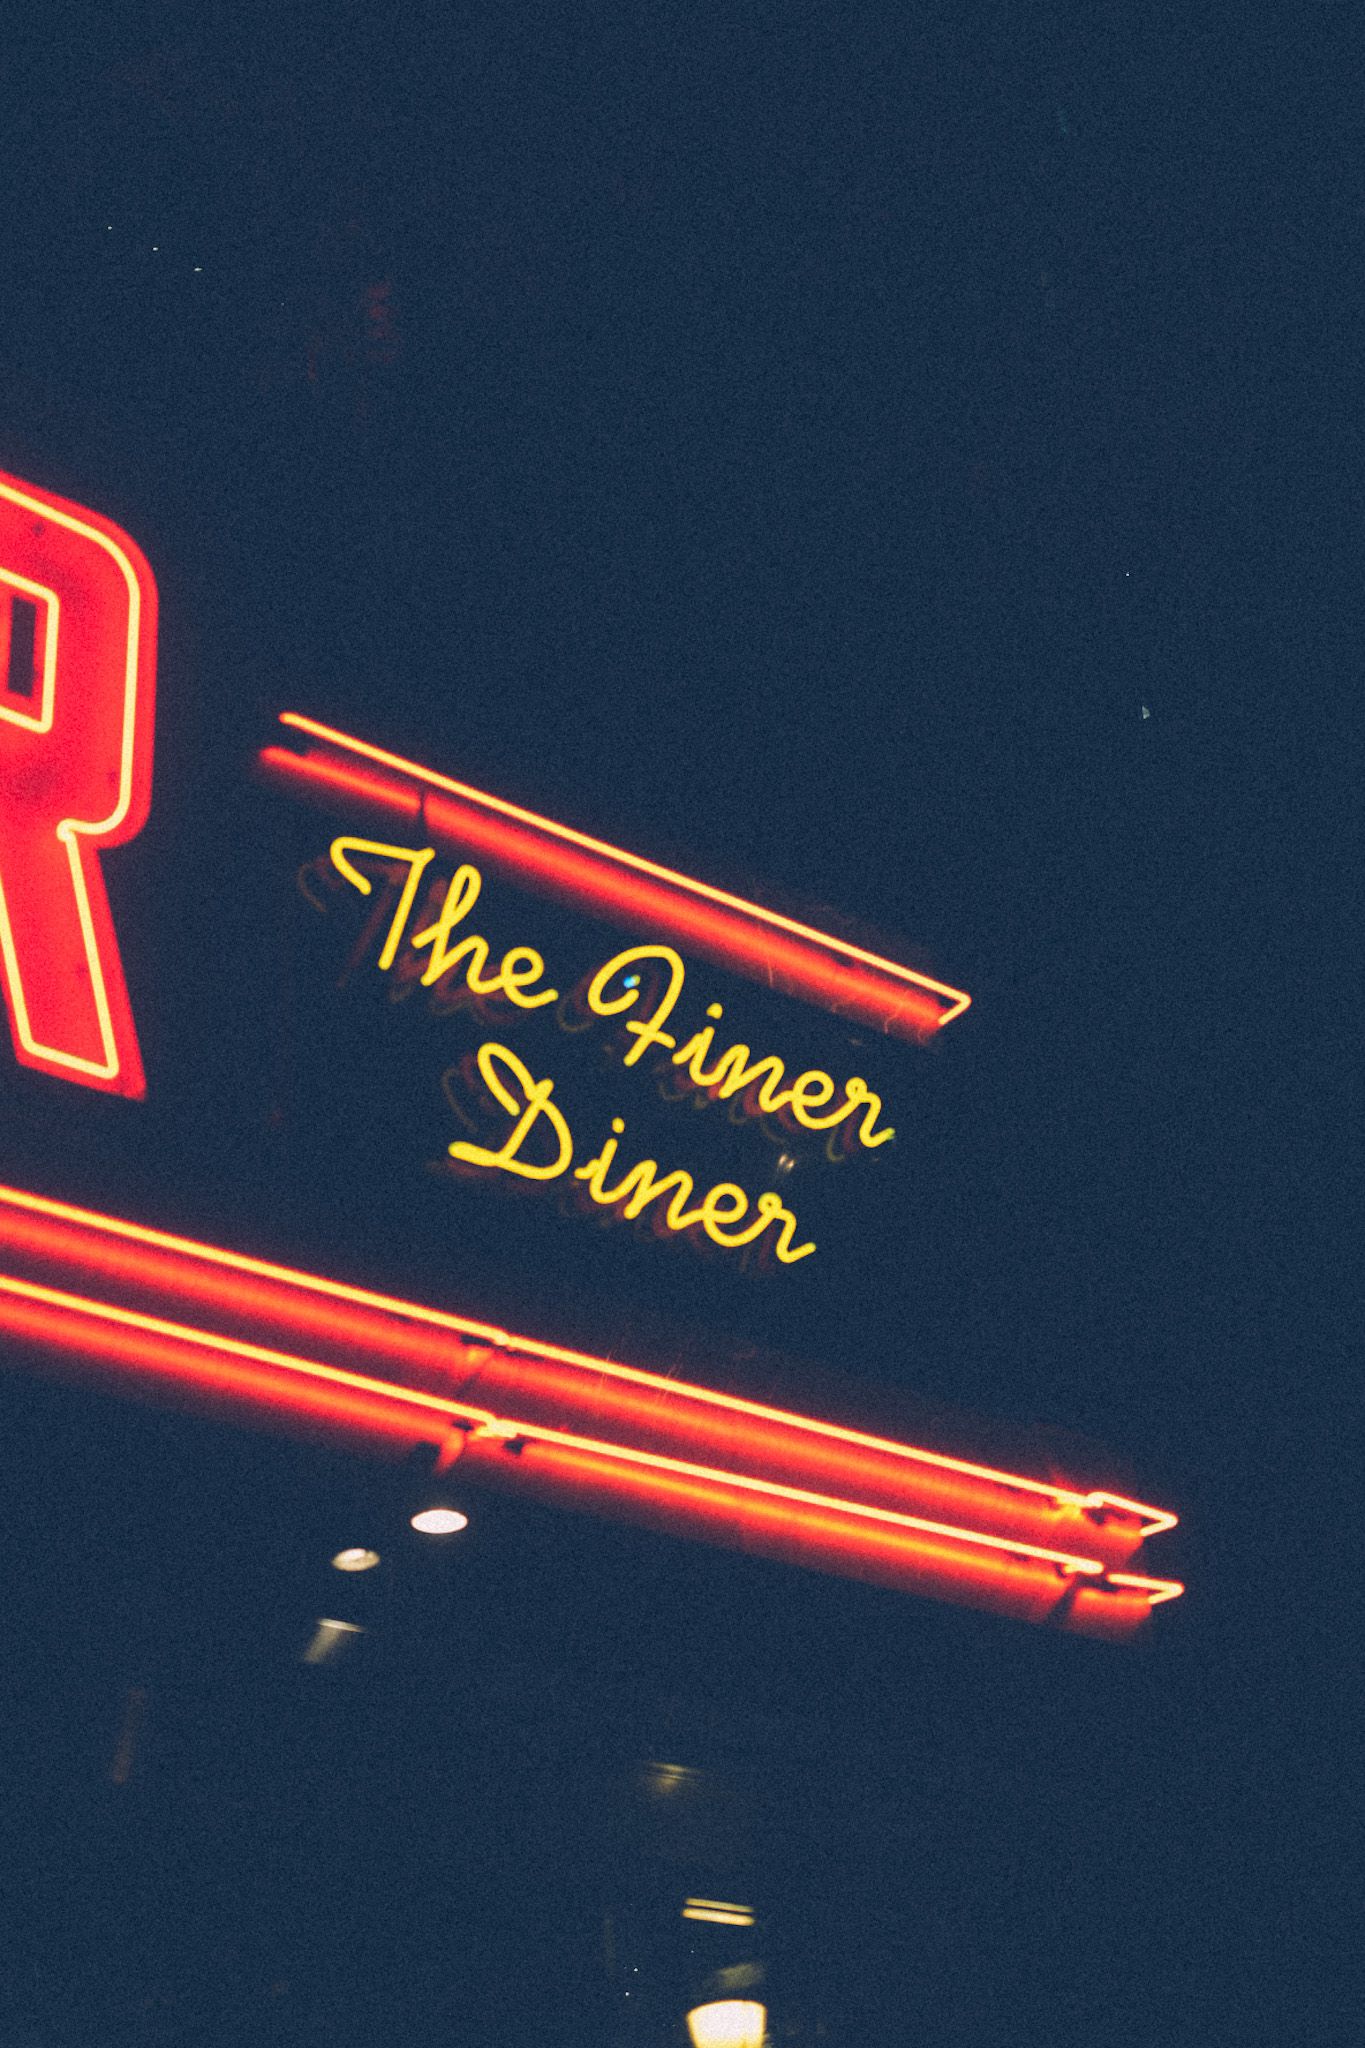 In the night, a neon sign emerges out of the bottom left of the photo, saying The Finer Diner.